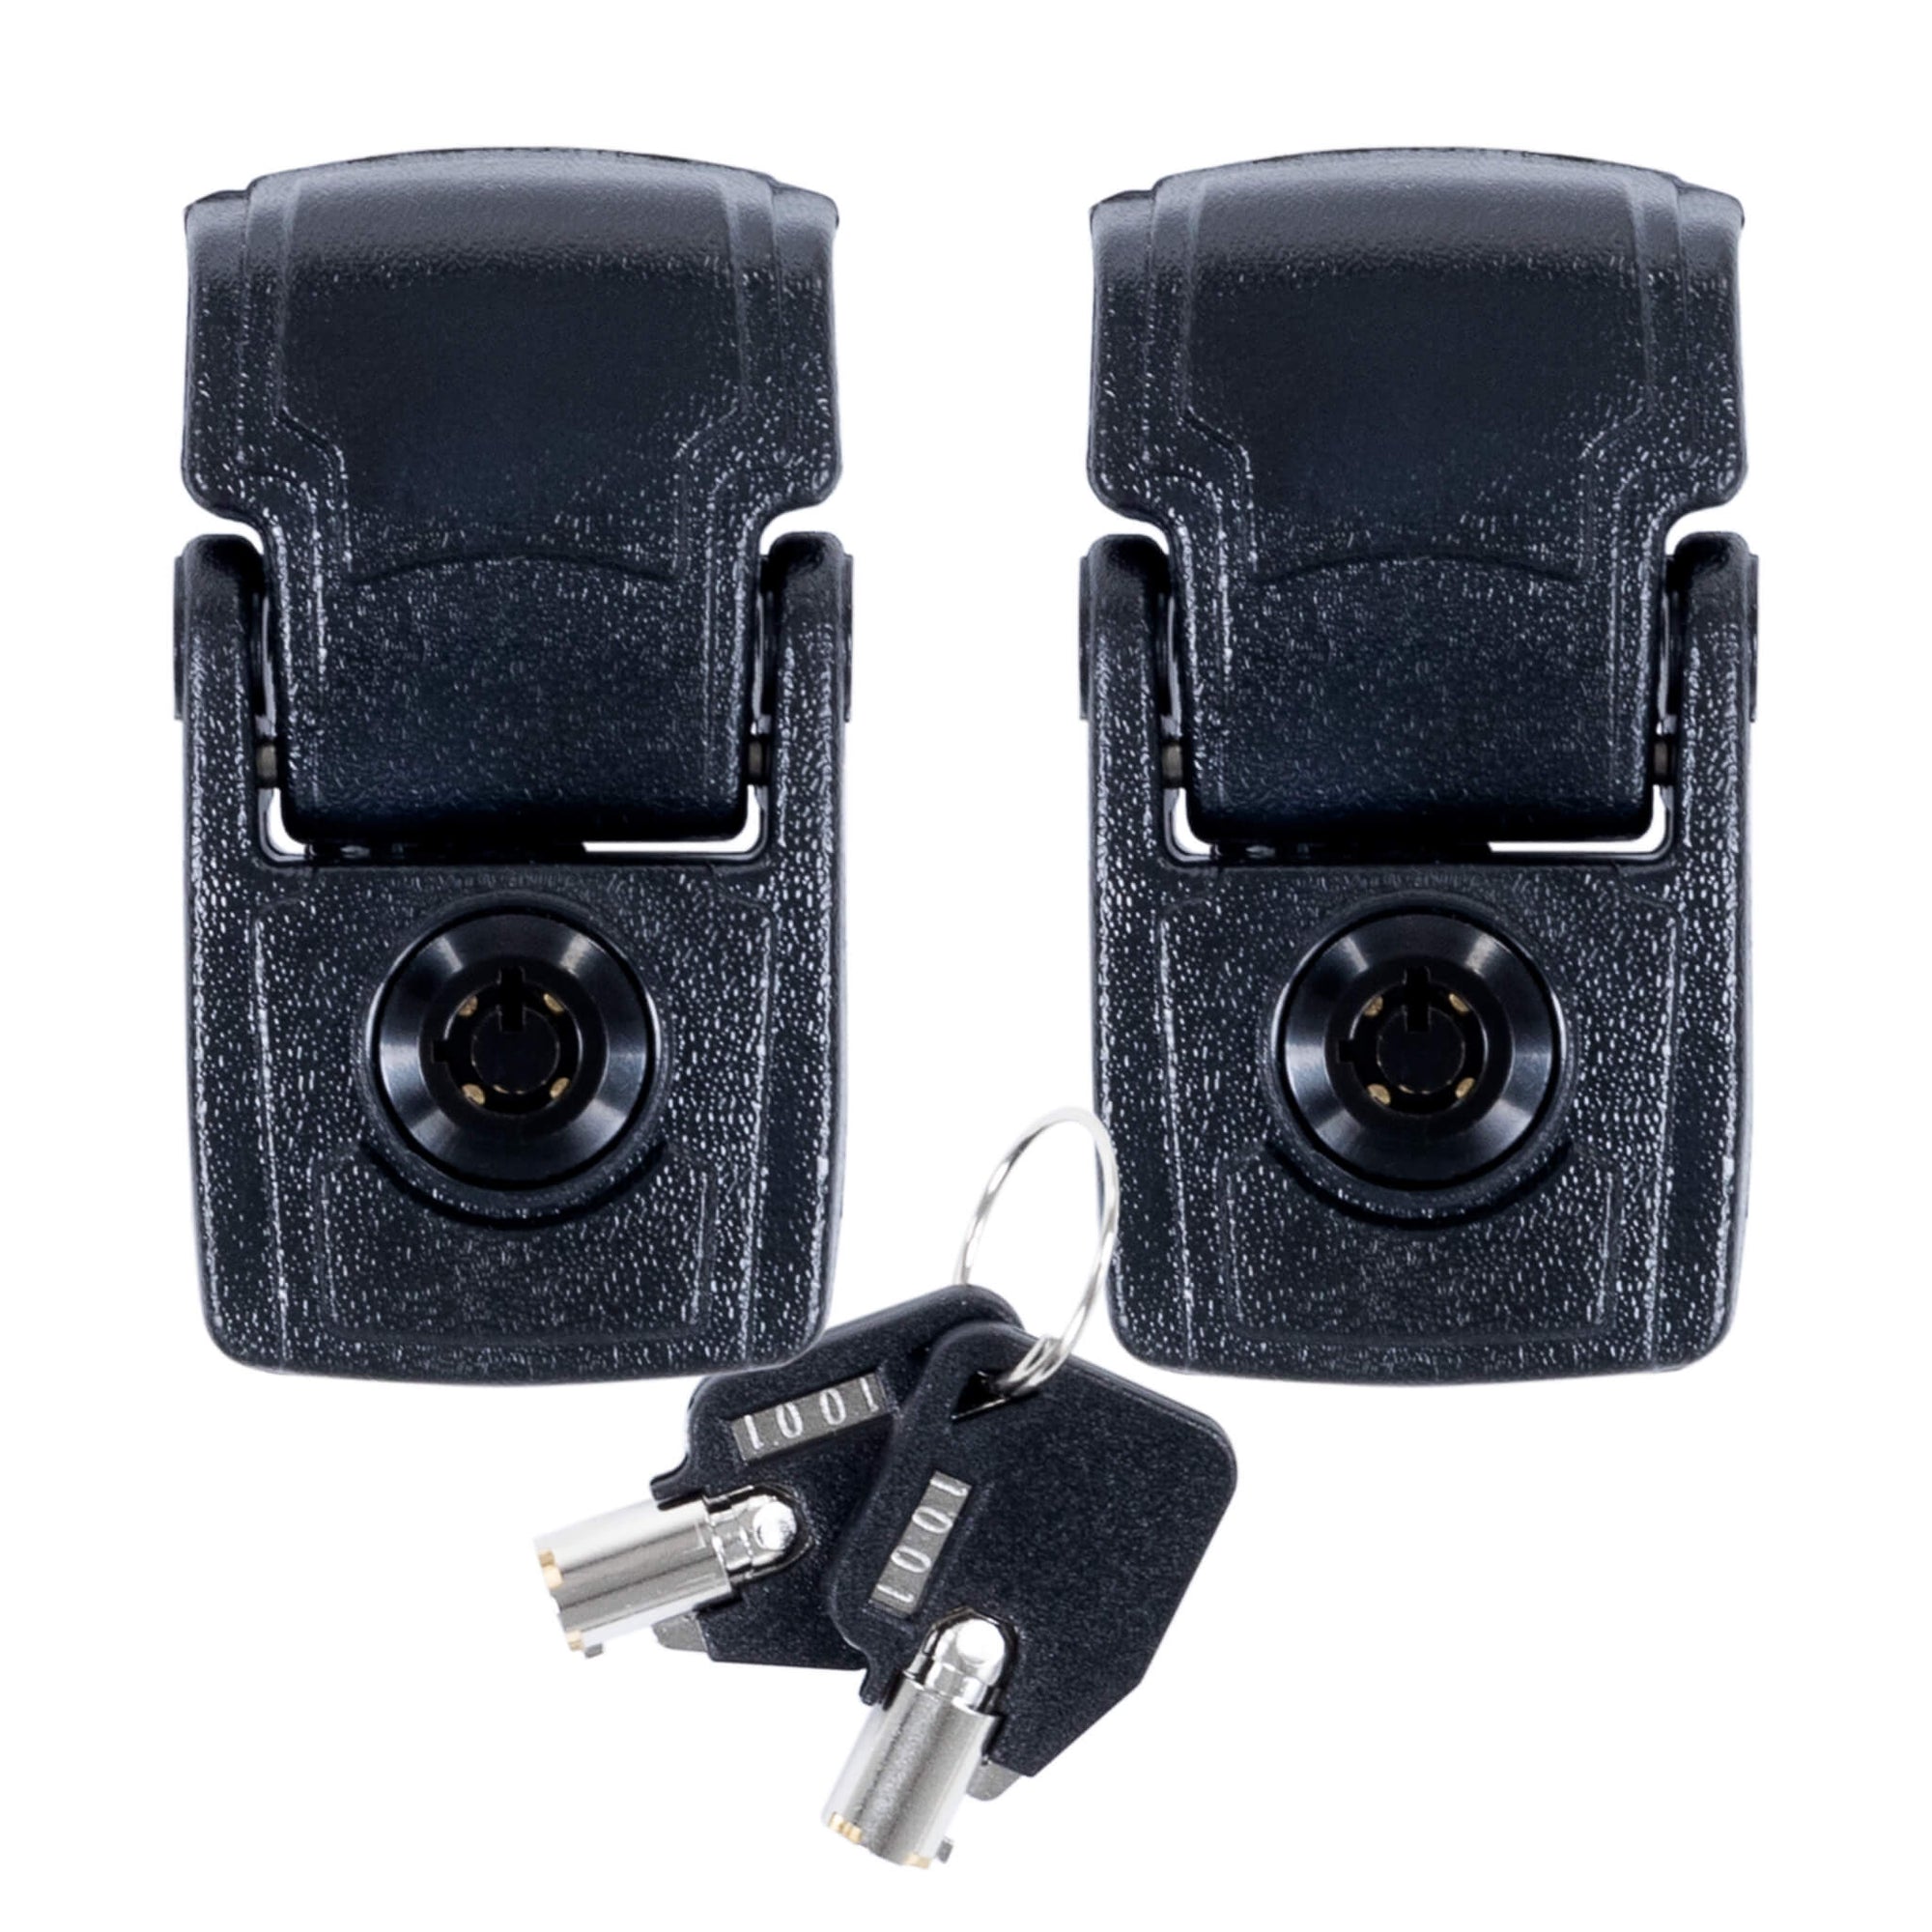 Pelican 1490 Replacement Locking Latches, Black (Set of 2 with Keys) ColorCase 